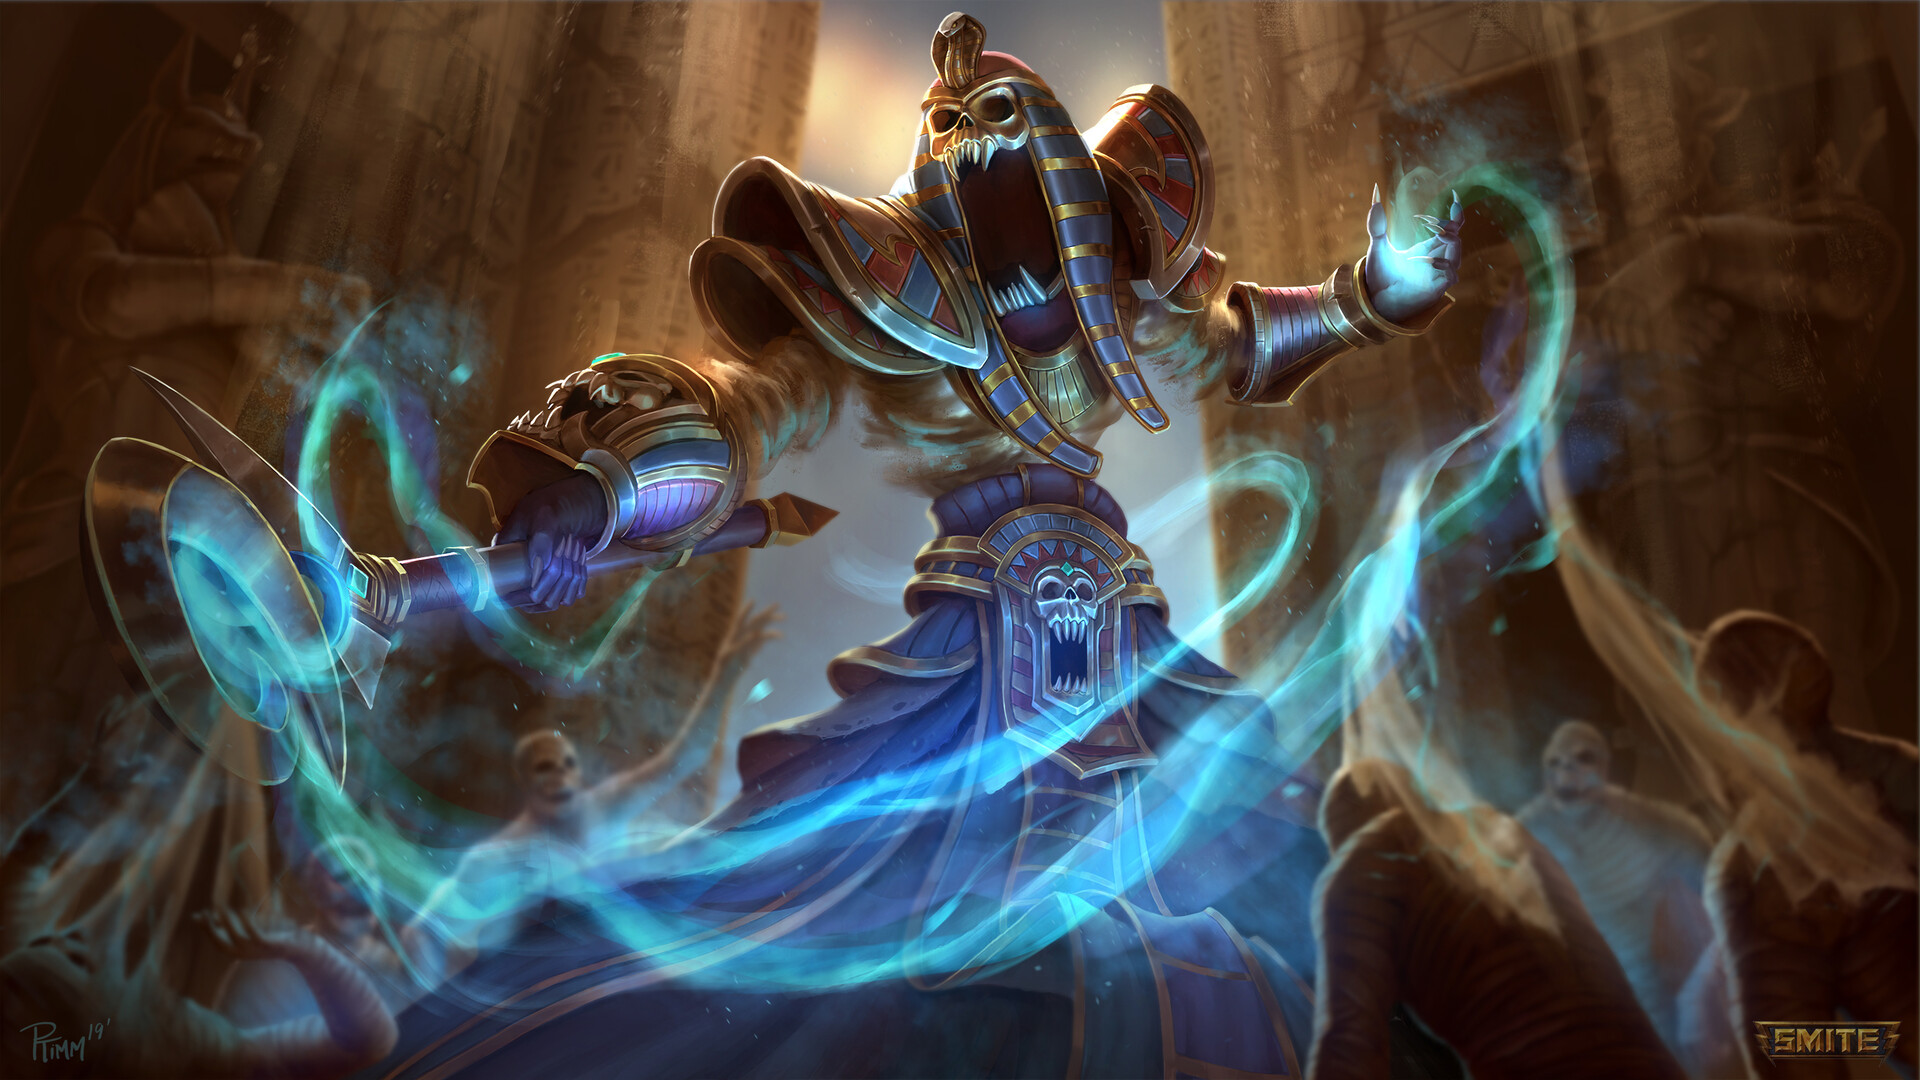 Hades Cursed Pharaoh Smite Skin by Andy Timm